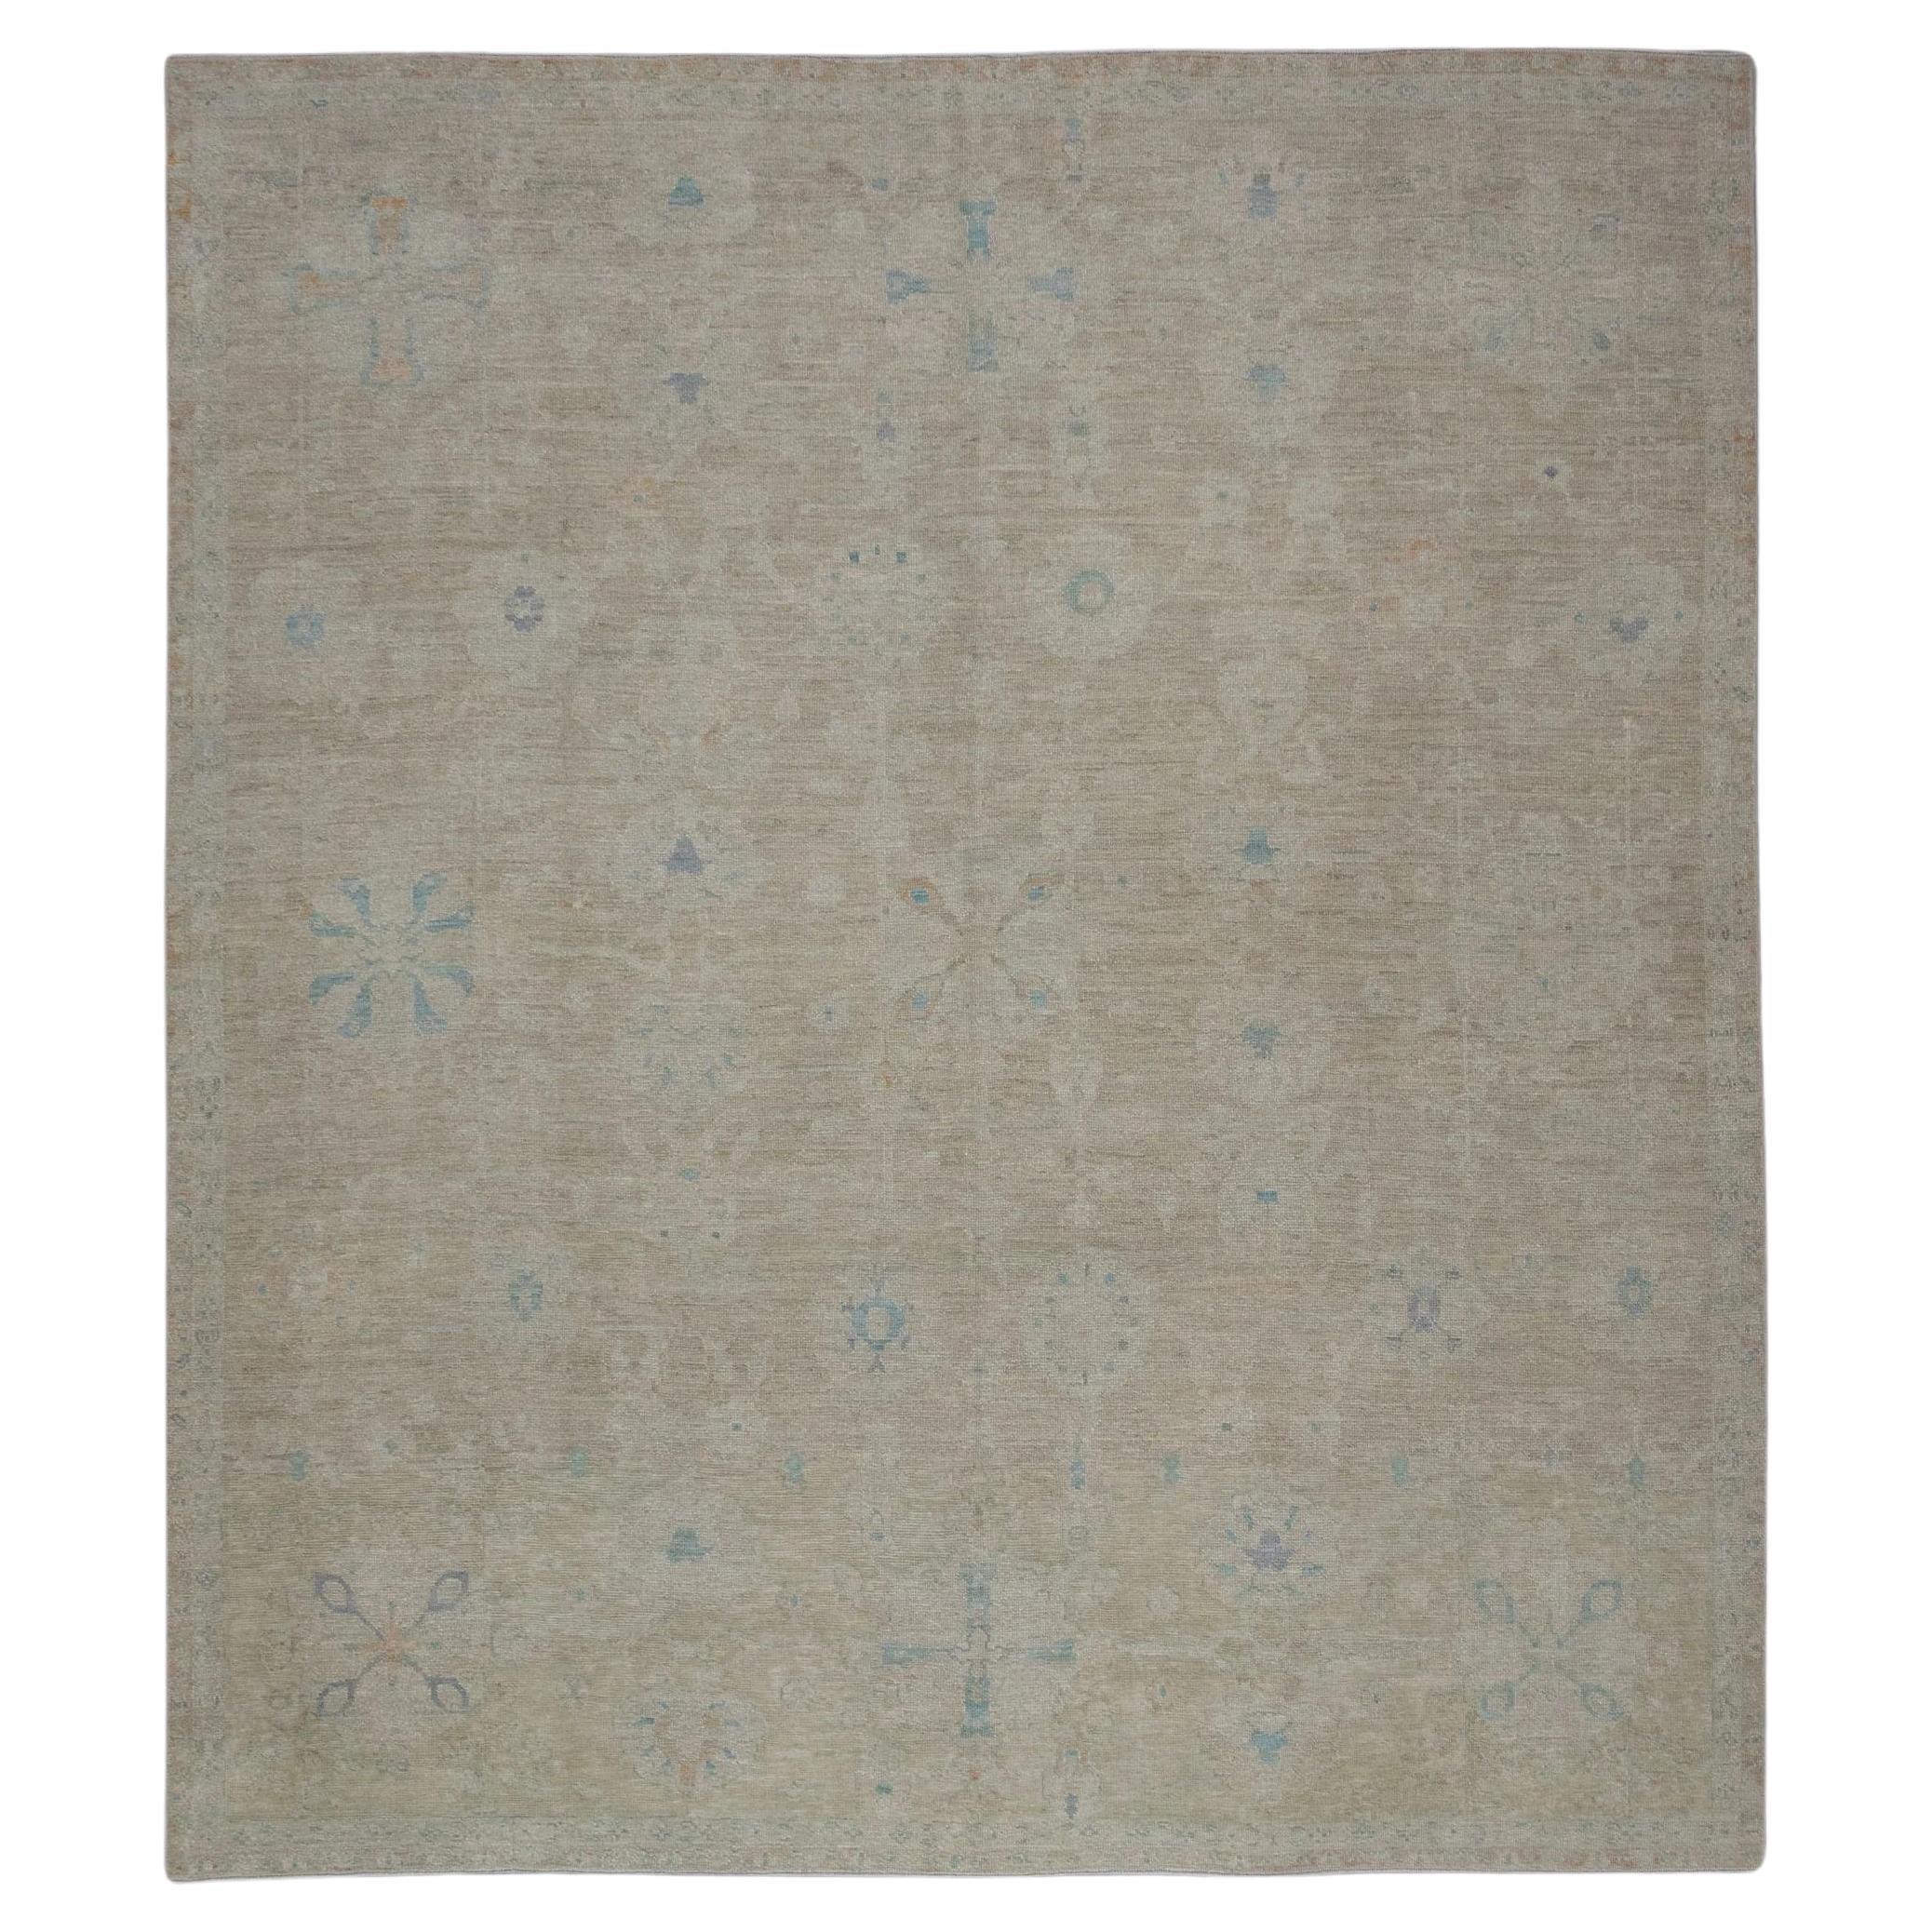 Multicolor Floral Turkish Finewoven Wool Oushak Rug 9'2" x 10'5" For Sale